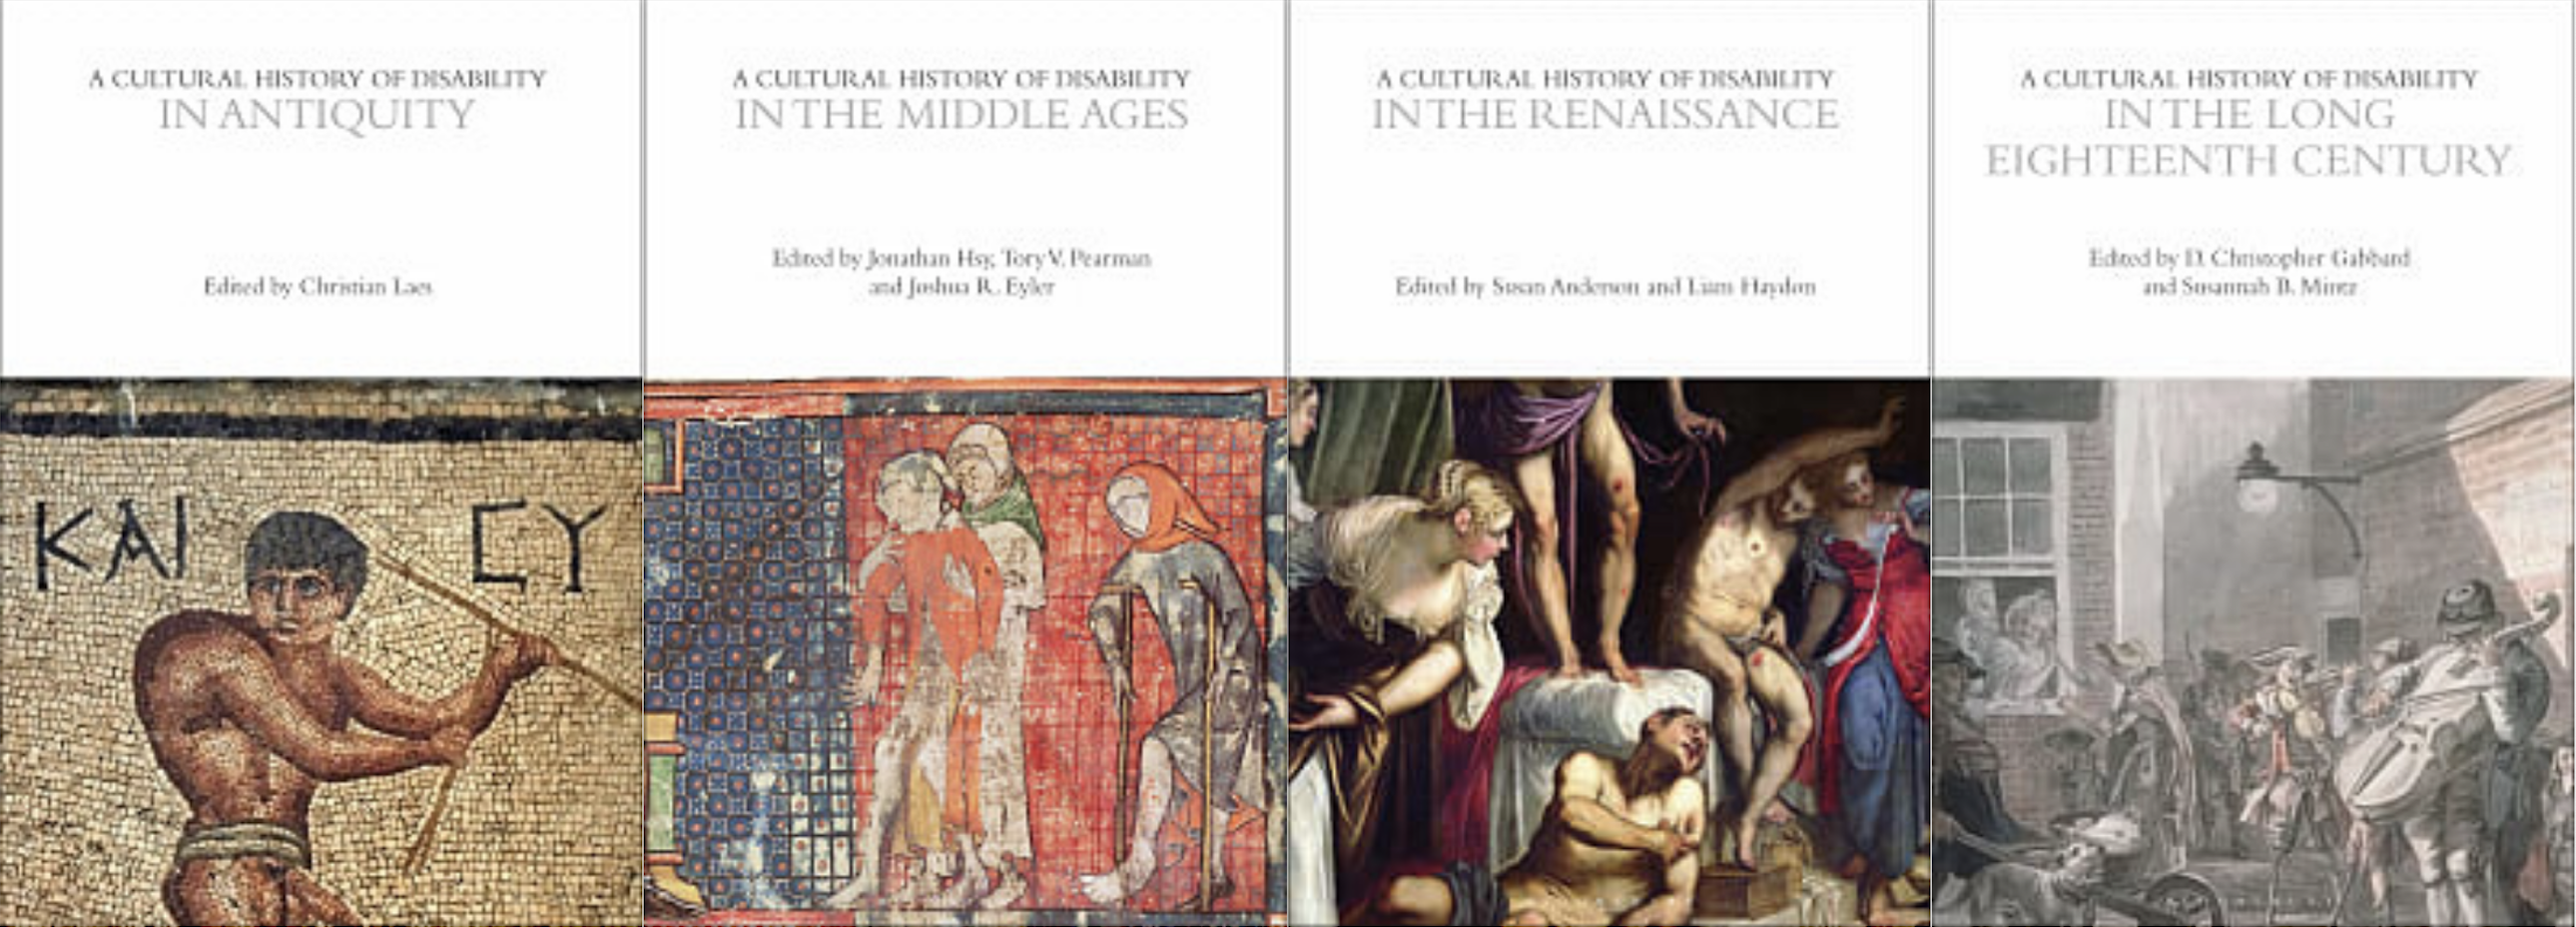 Cover images of premodern books from Bloomsbury Cultural History series